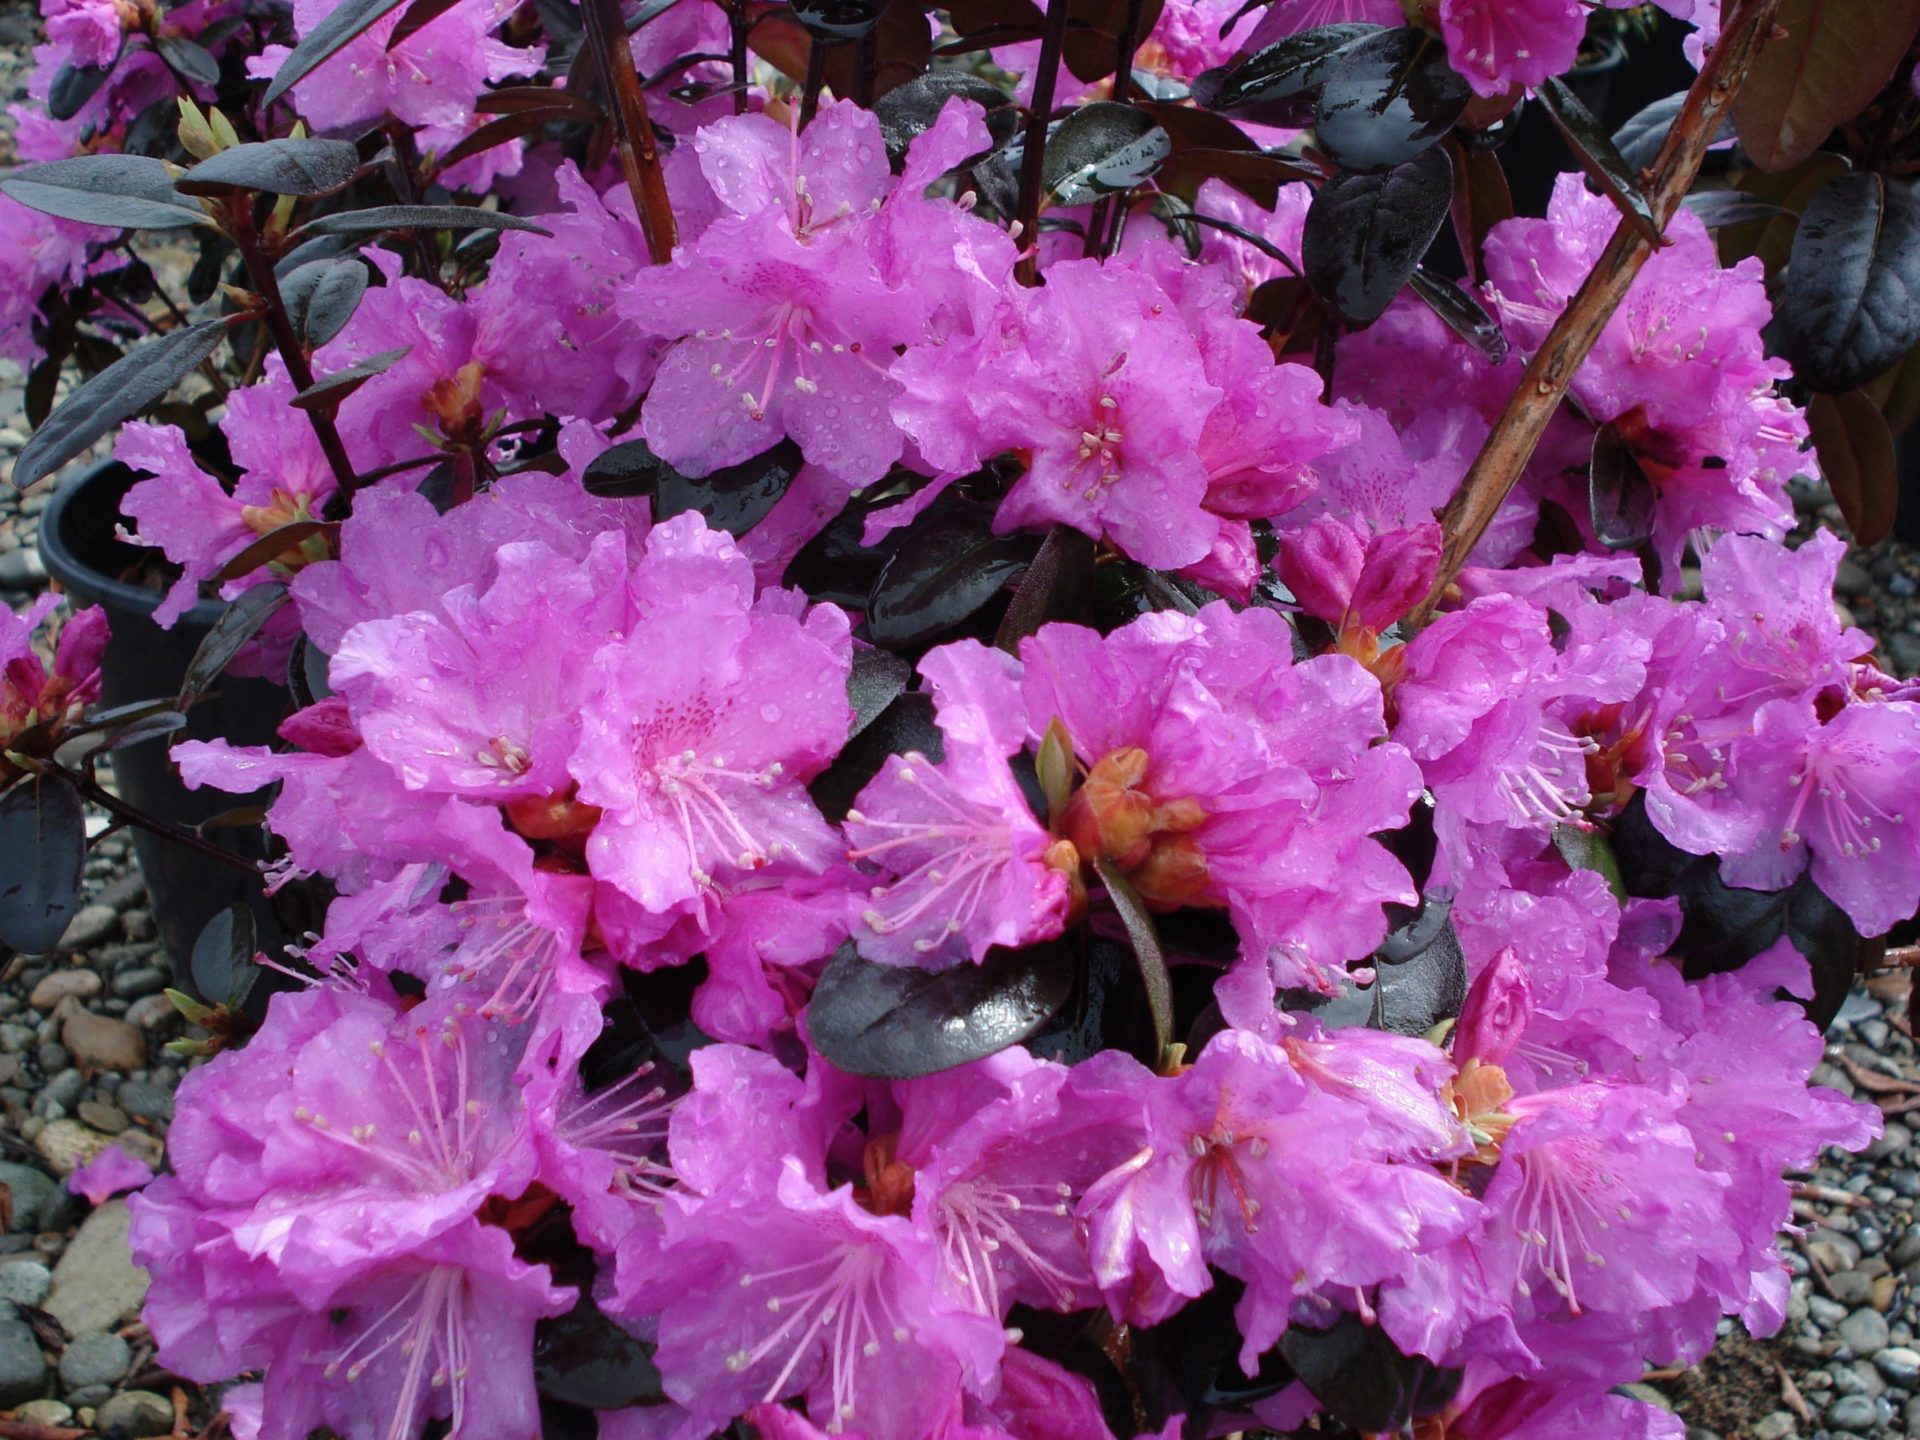 Image of Rhododendron 'PJM' pink rhododendron